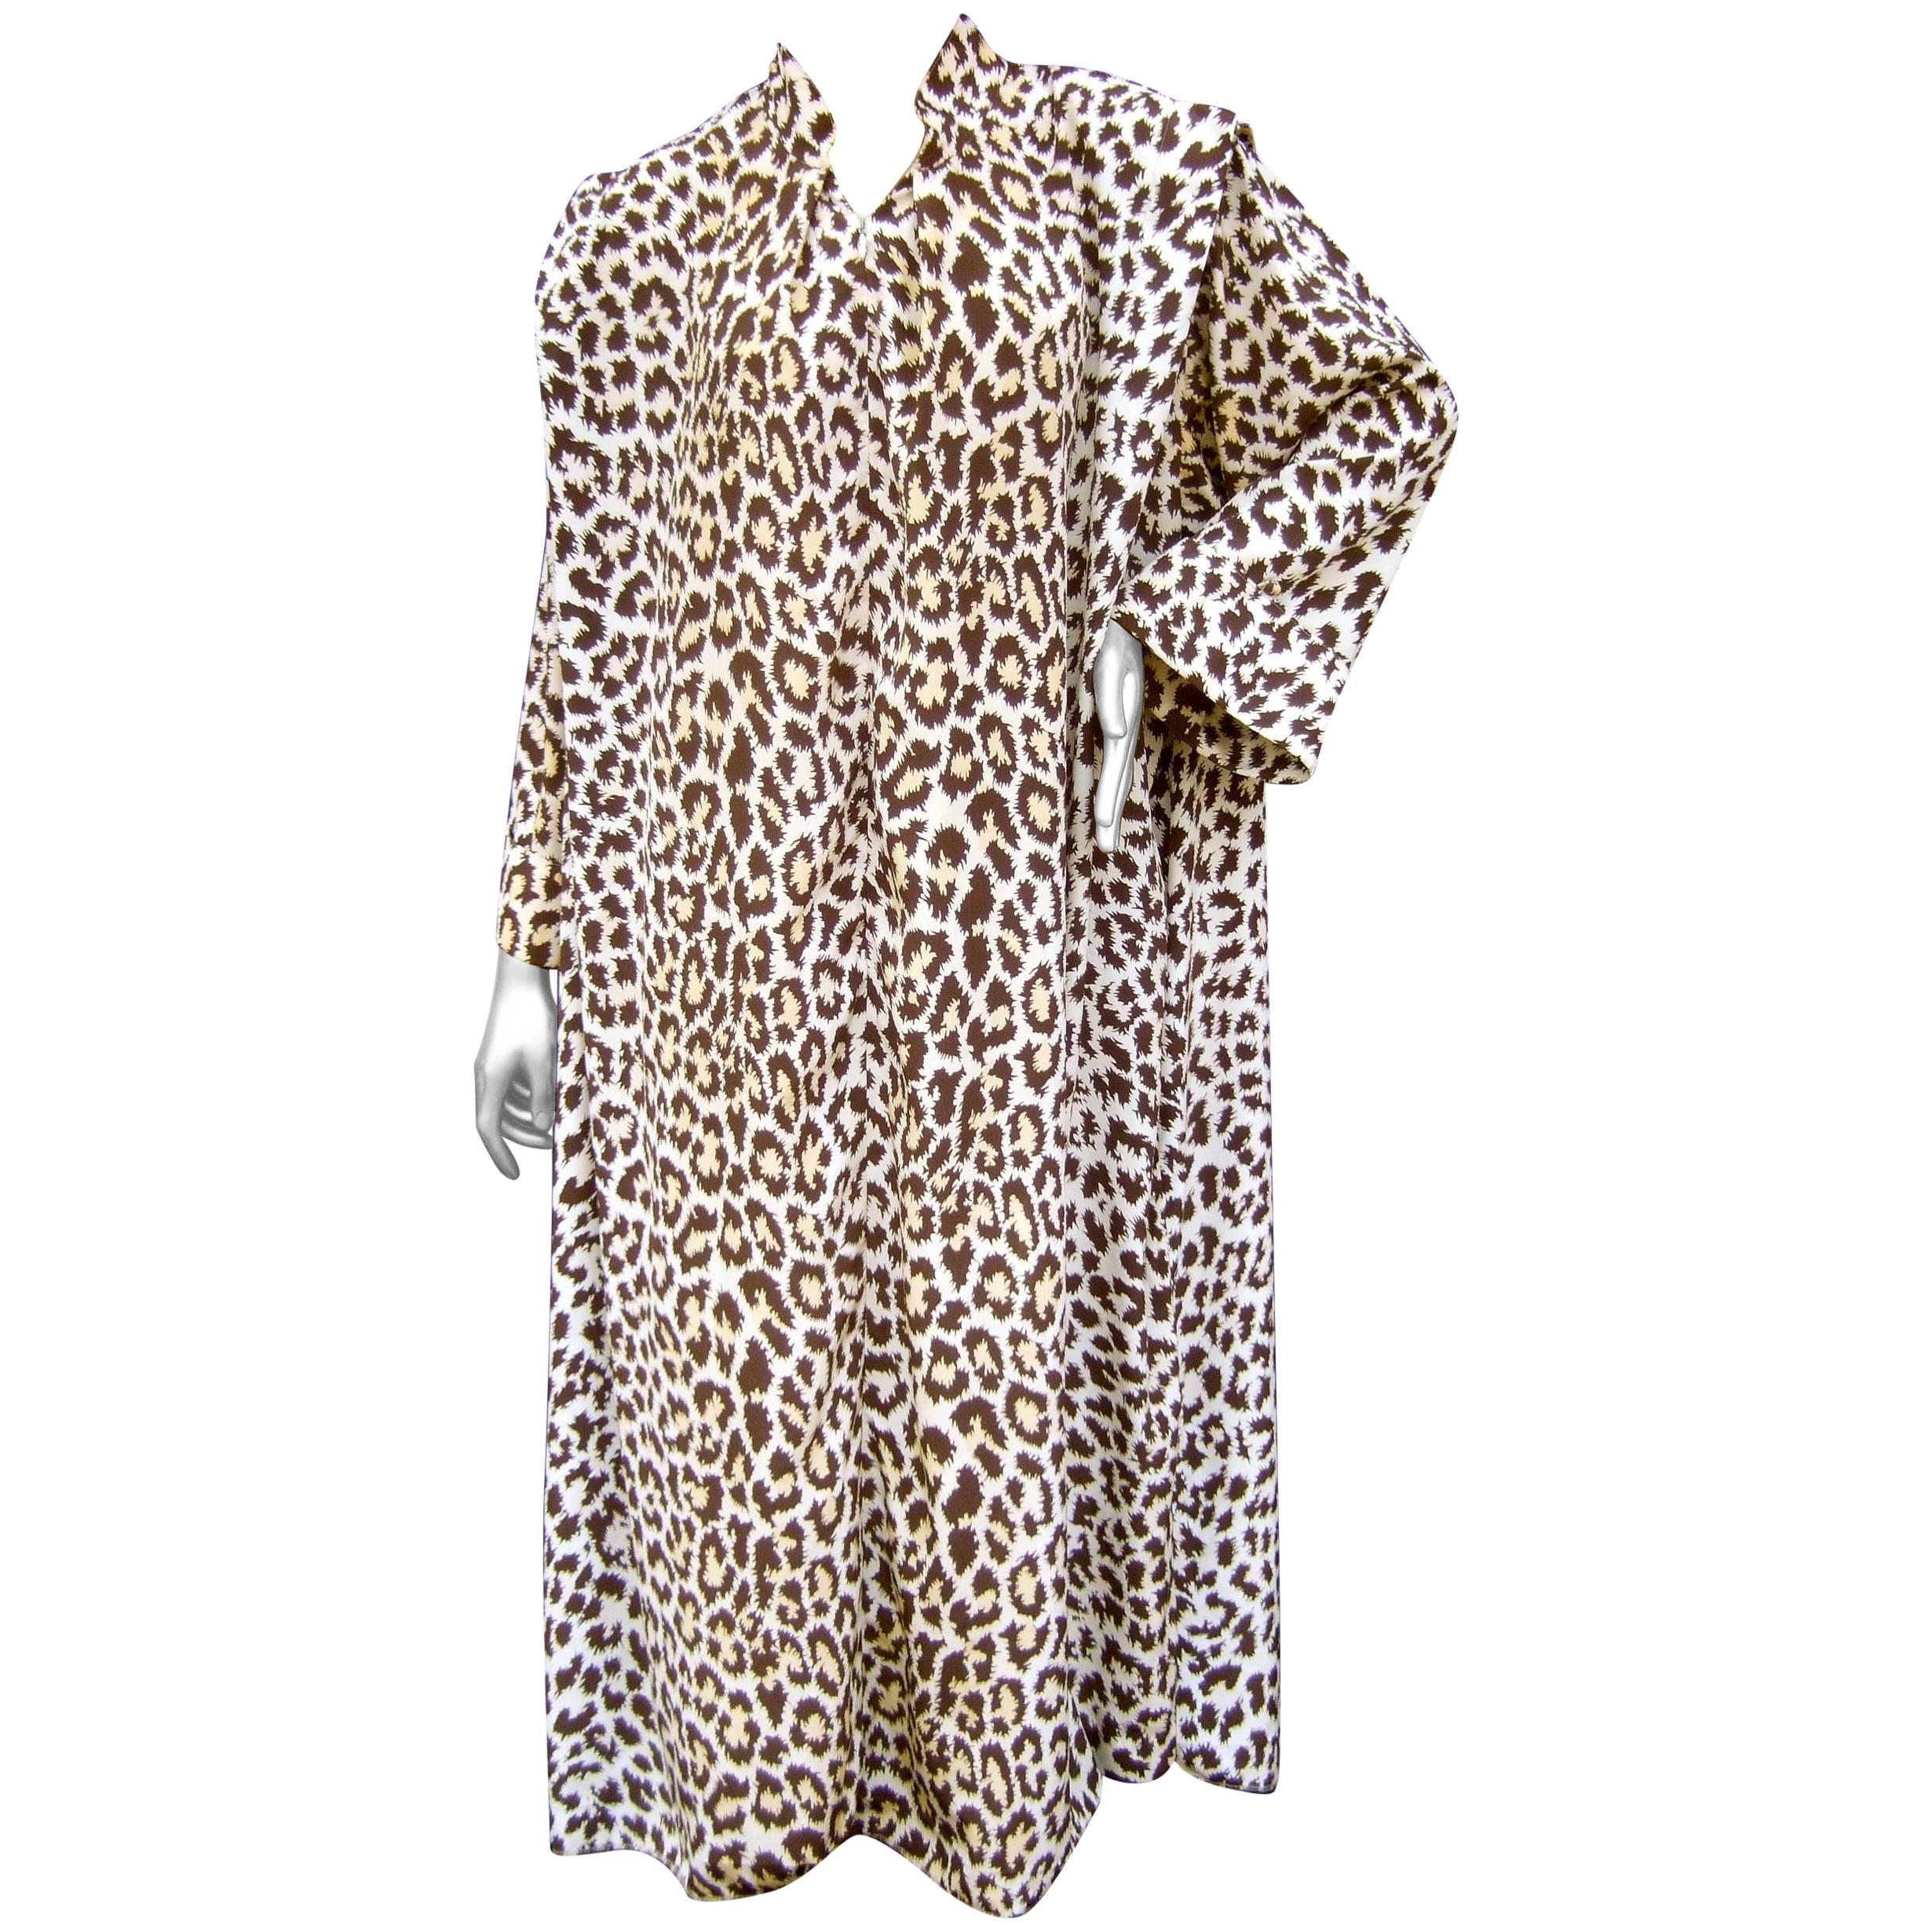 Saks Fifth Avenue Animal Print Lounge Gown for Mollie Parnis circa 1970s